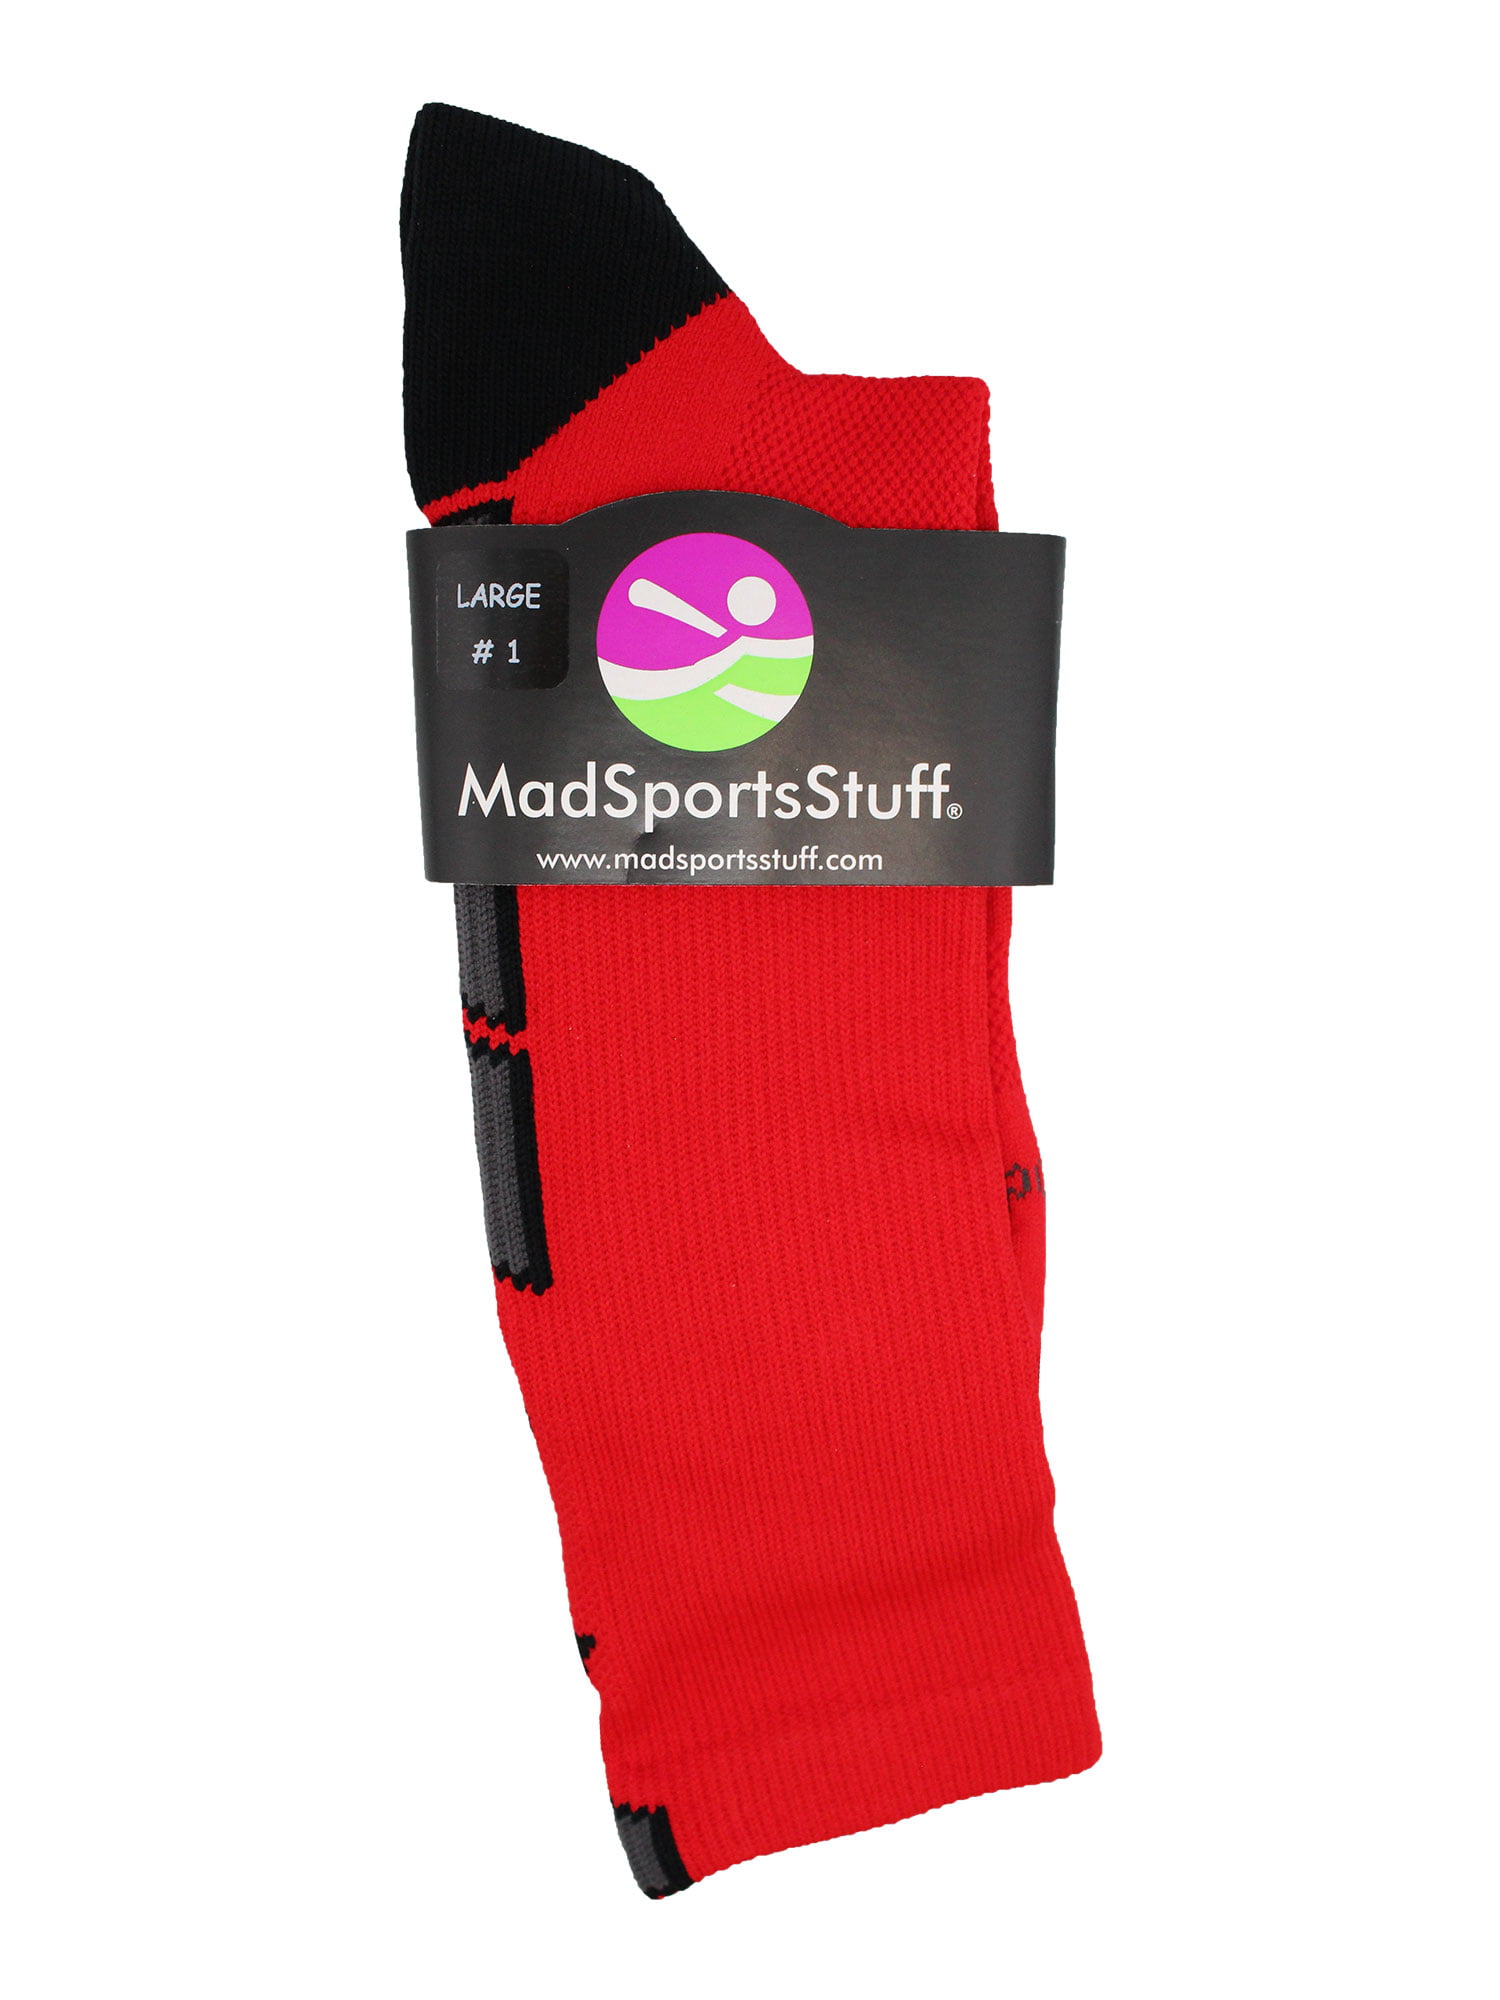 MadSportsStuff Player Id Jersey Number Socks Crew Length Red and Black